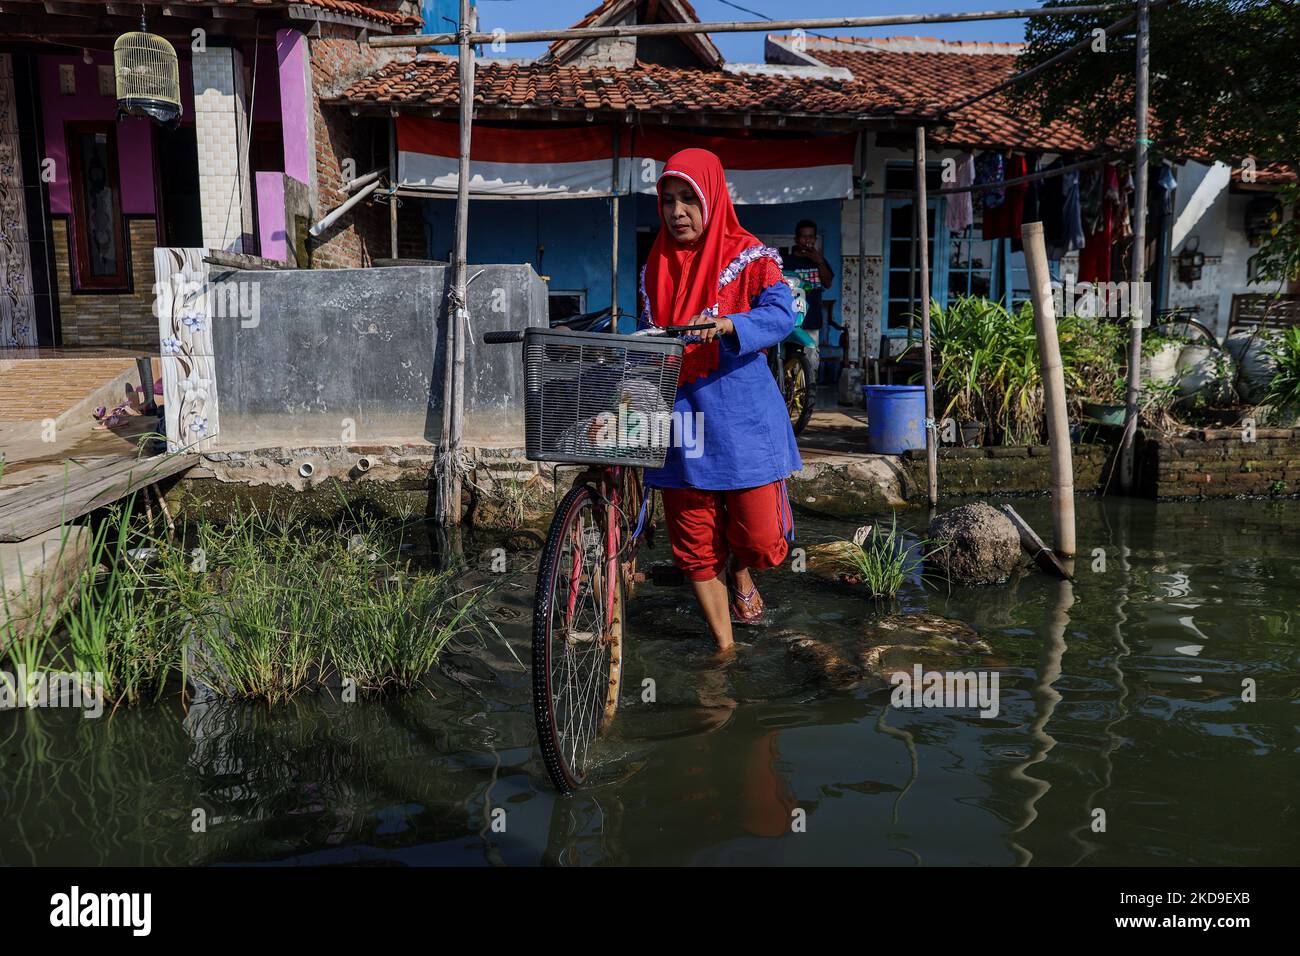 A worker with bicycle leaves her home surrounded by rising sea levels at low-lying Jeruk Sari neighborhood in coastal Pekalongan, Central Java, Indonesia, June 5, 2021. An area in which almost every available space is used for batik production, with a high level of poverty, vulnerable to both rising sea levels and high river peak flows. Pekalongan is a city known for batik, a traditional Indonesian method of using wax to resist water-based dyes to depict patterns and drawings, usually on fabric. This textile has traditionally been crafted by hand in family workshops and small-scale cottage ind Stock Photo